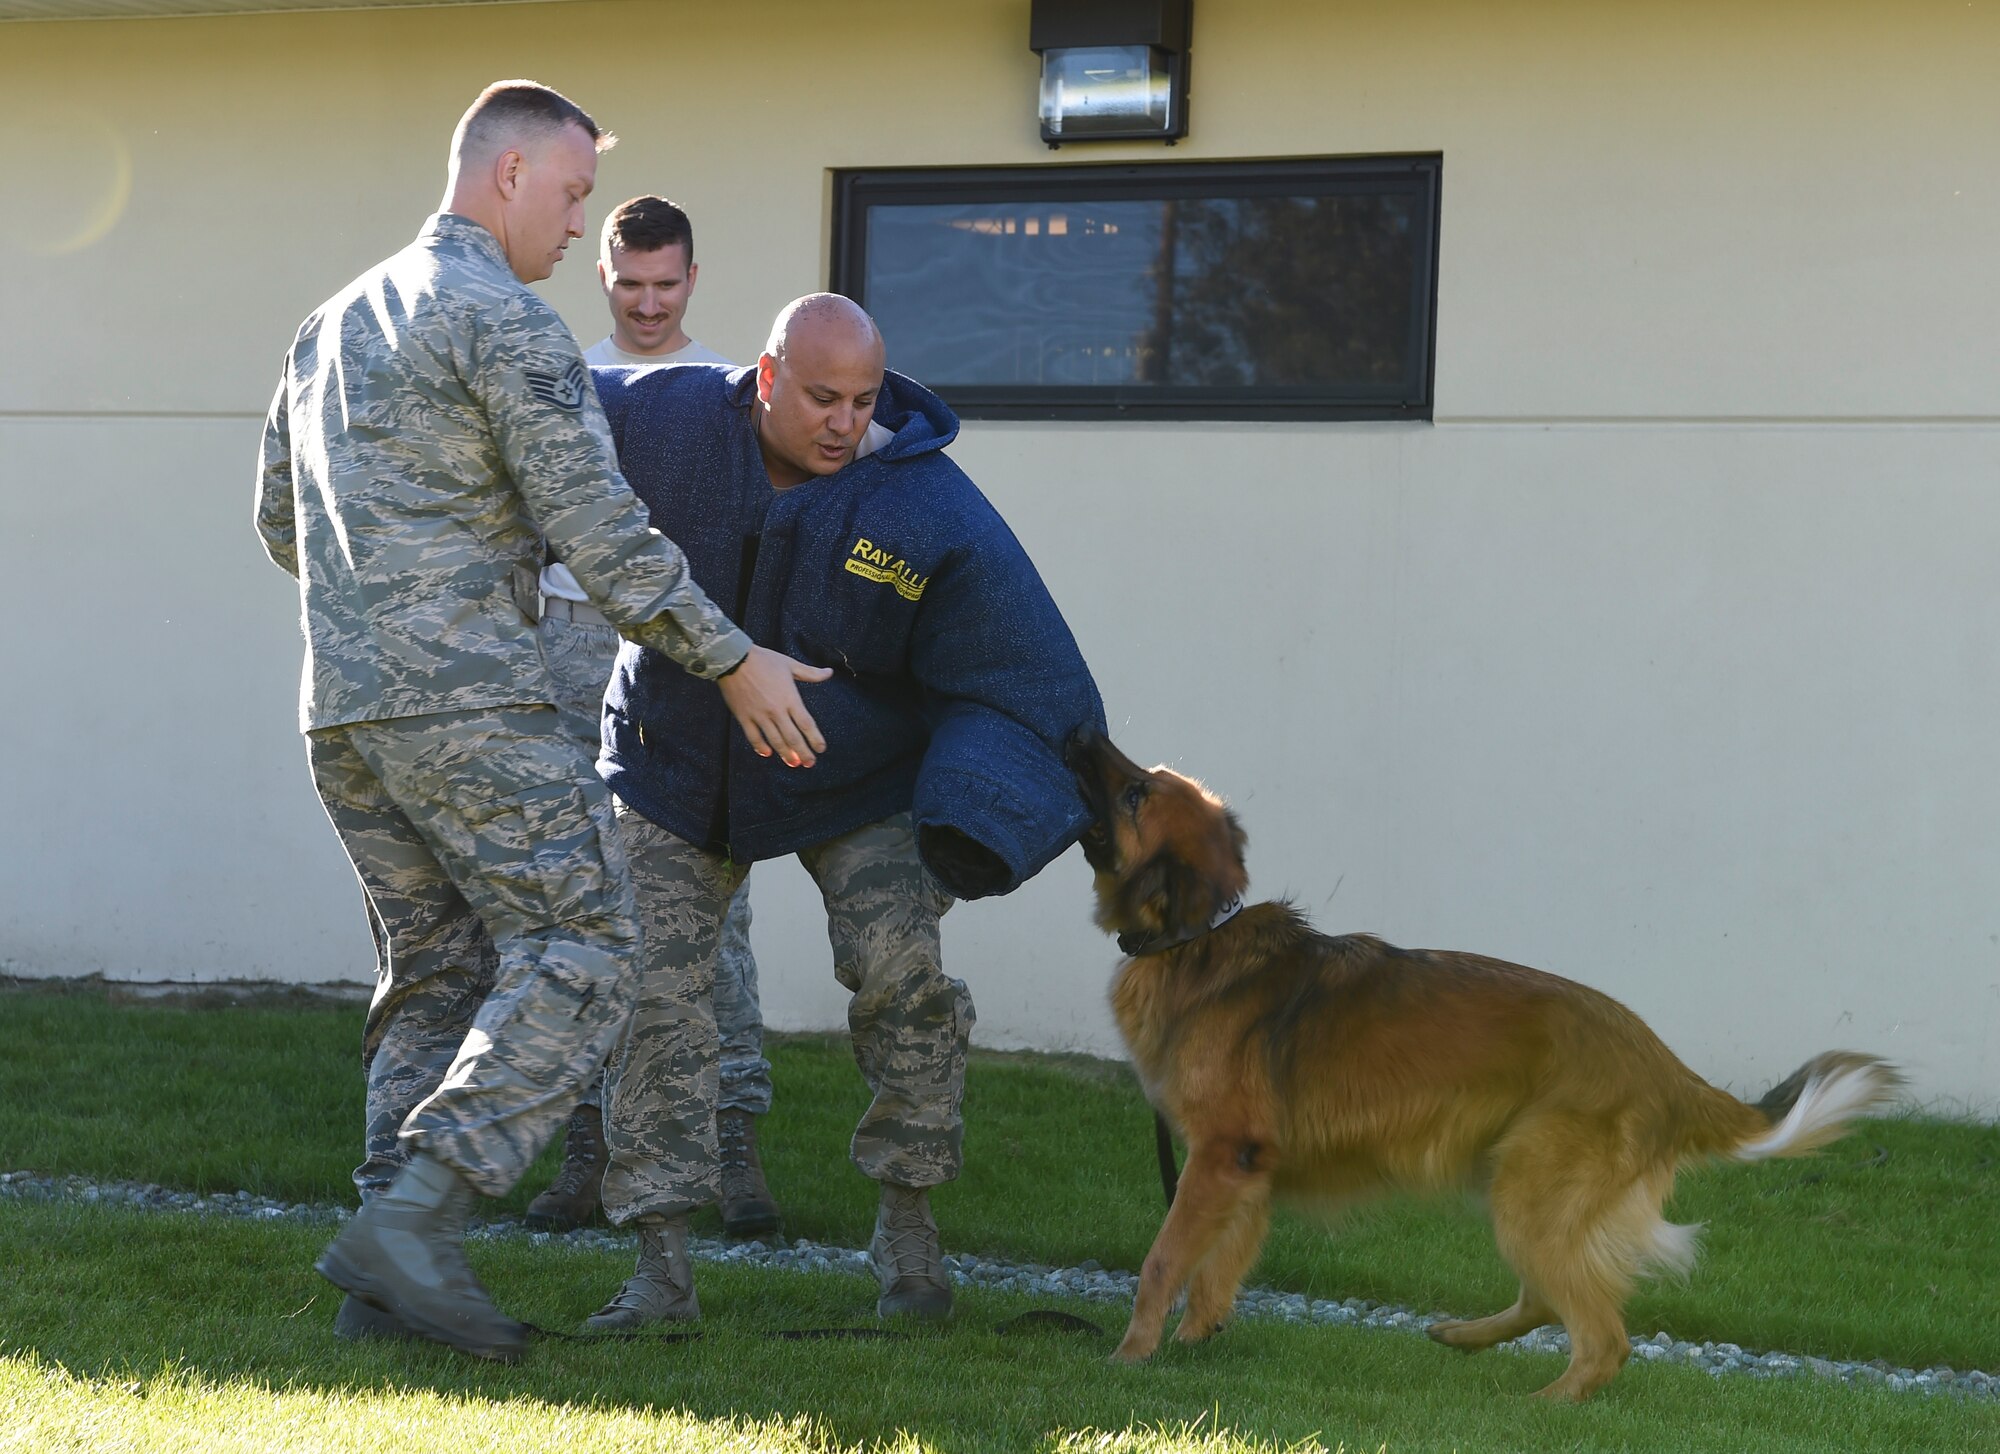 The 62nd Airlift Wing Command Chief, Zaki Mazid, is attacked by a military working dog during military working dog demonstration at Joint Base Elmendorf-Richardson, Alaska, Sept. 1, 2016. McChord civic leaders received this demonstration as part of their civic leader fly away tour at JBER.  (U.S. Air Force photo/ Staff Sgt. Naomi Shipley)